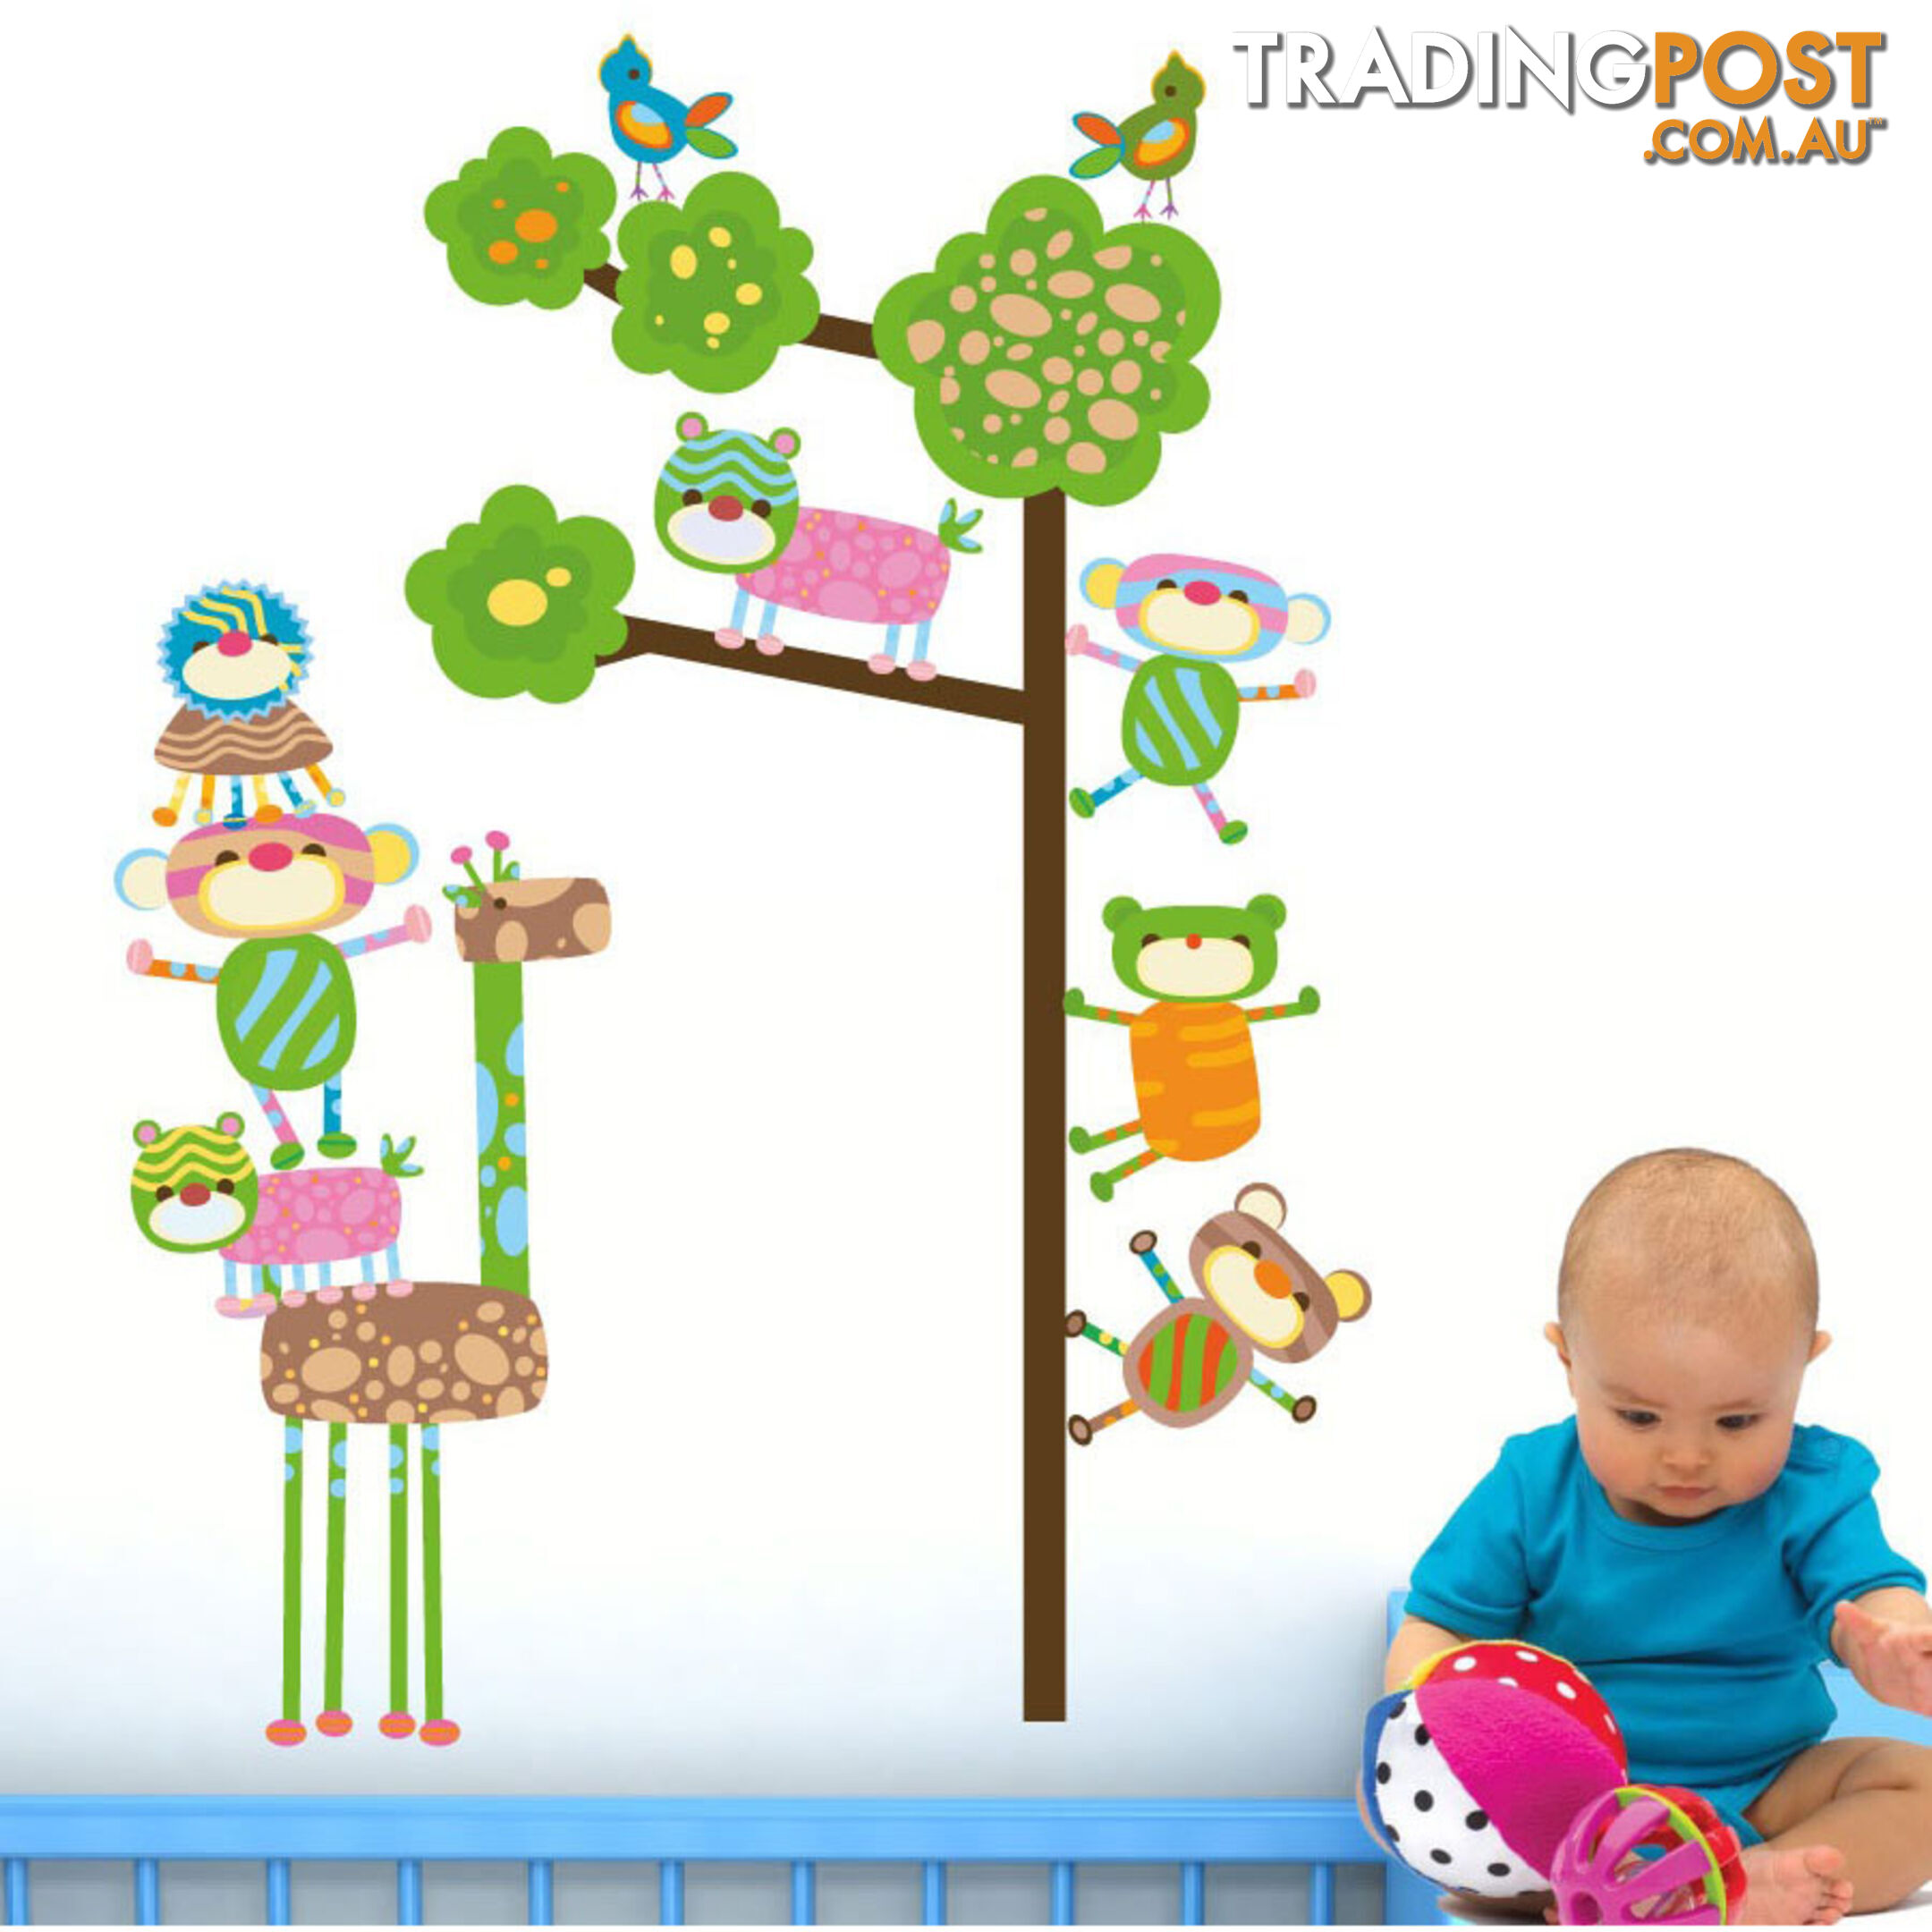 Large Size Funky Monkeys in a Tree Wall Stickers  - Totally movable